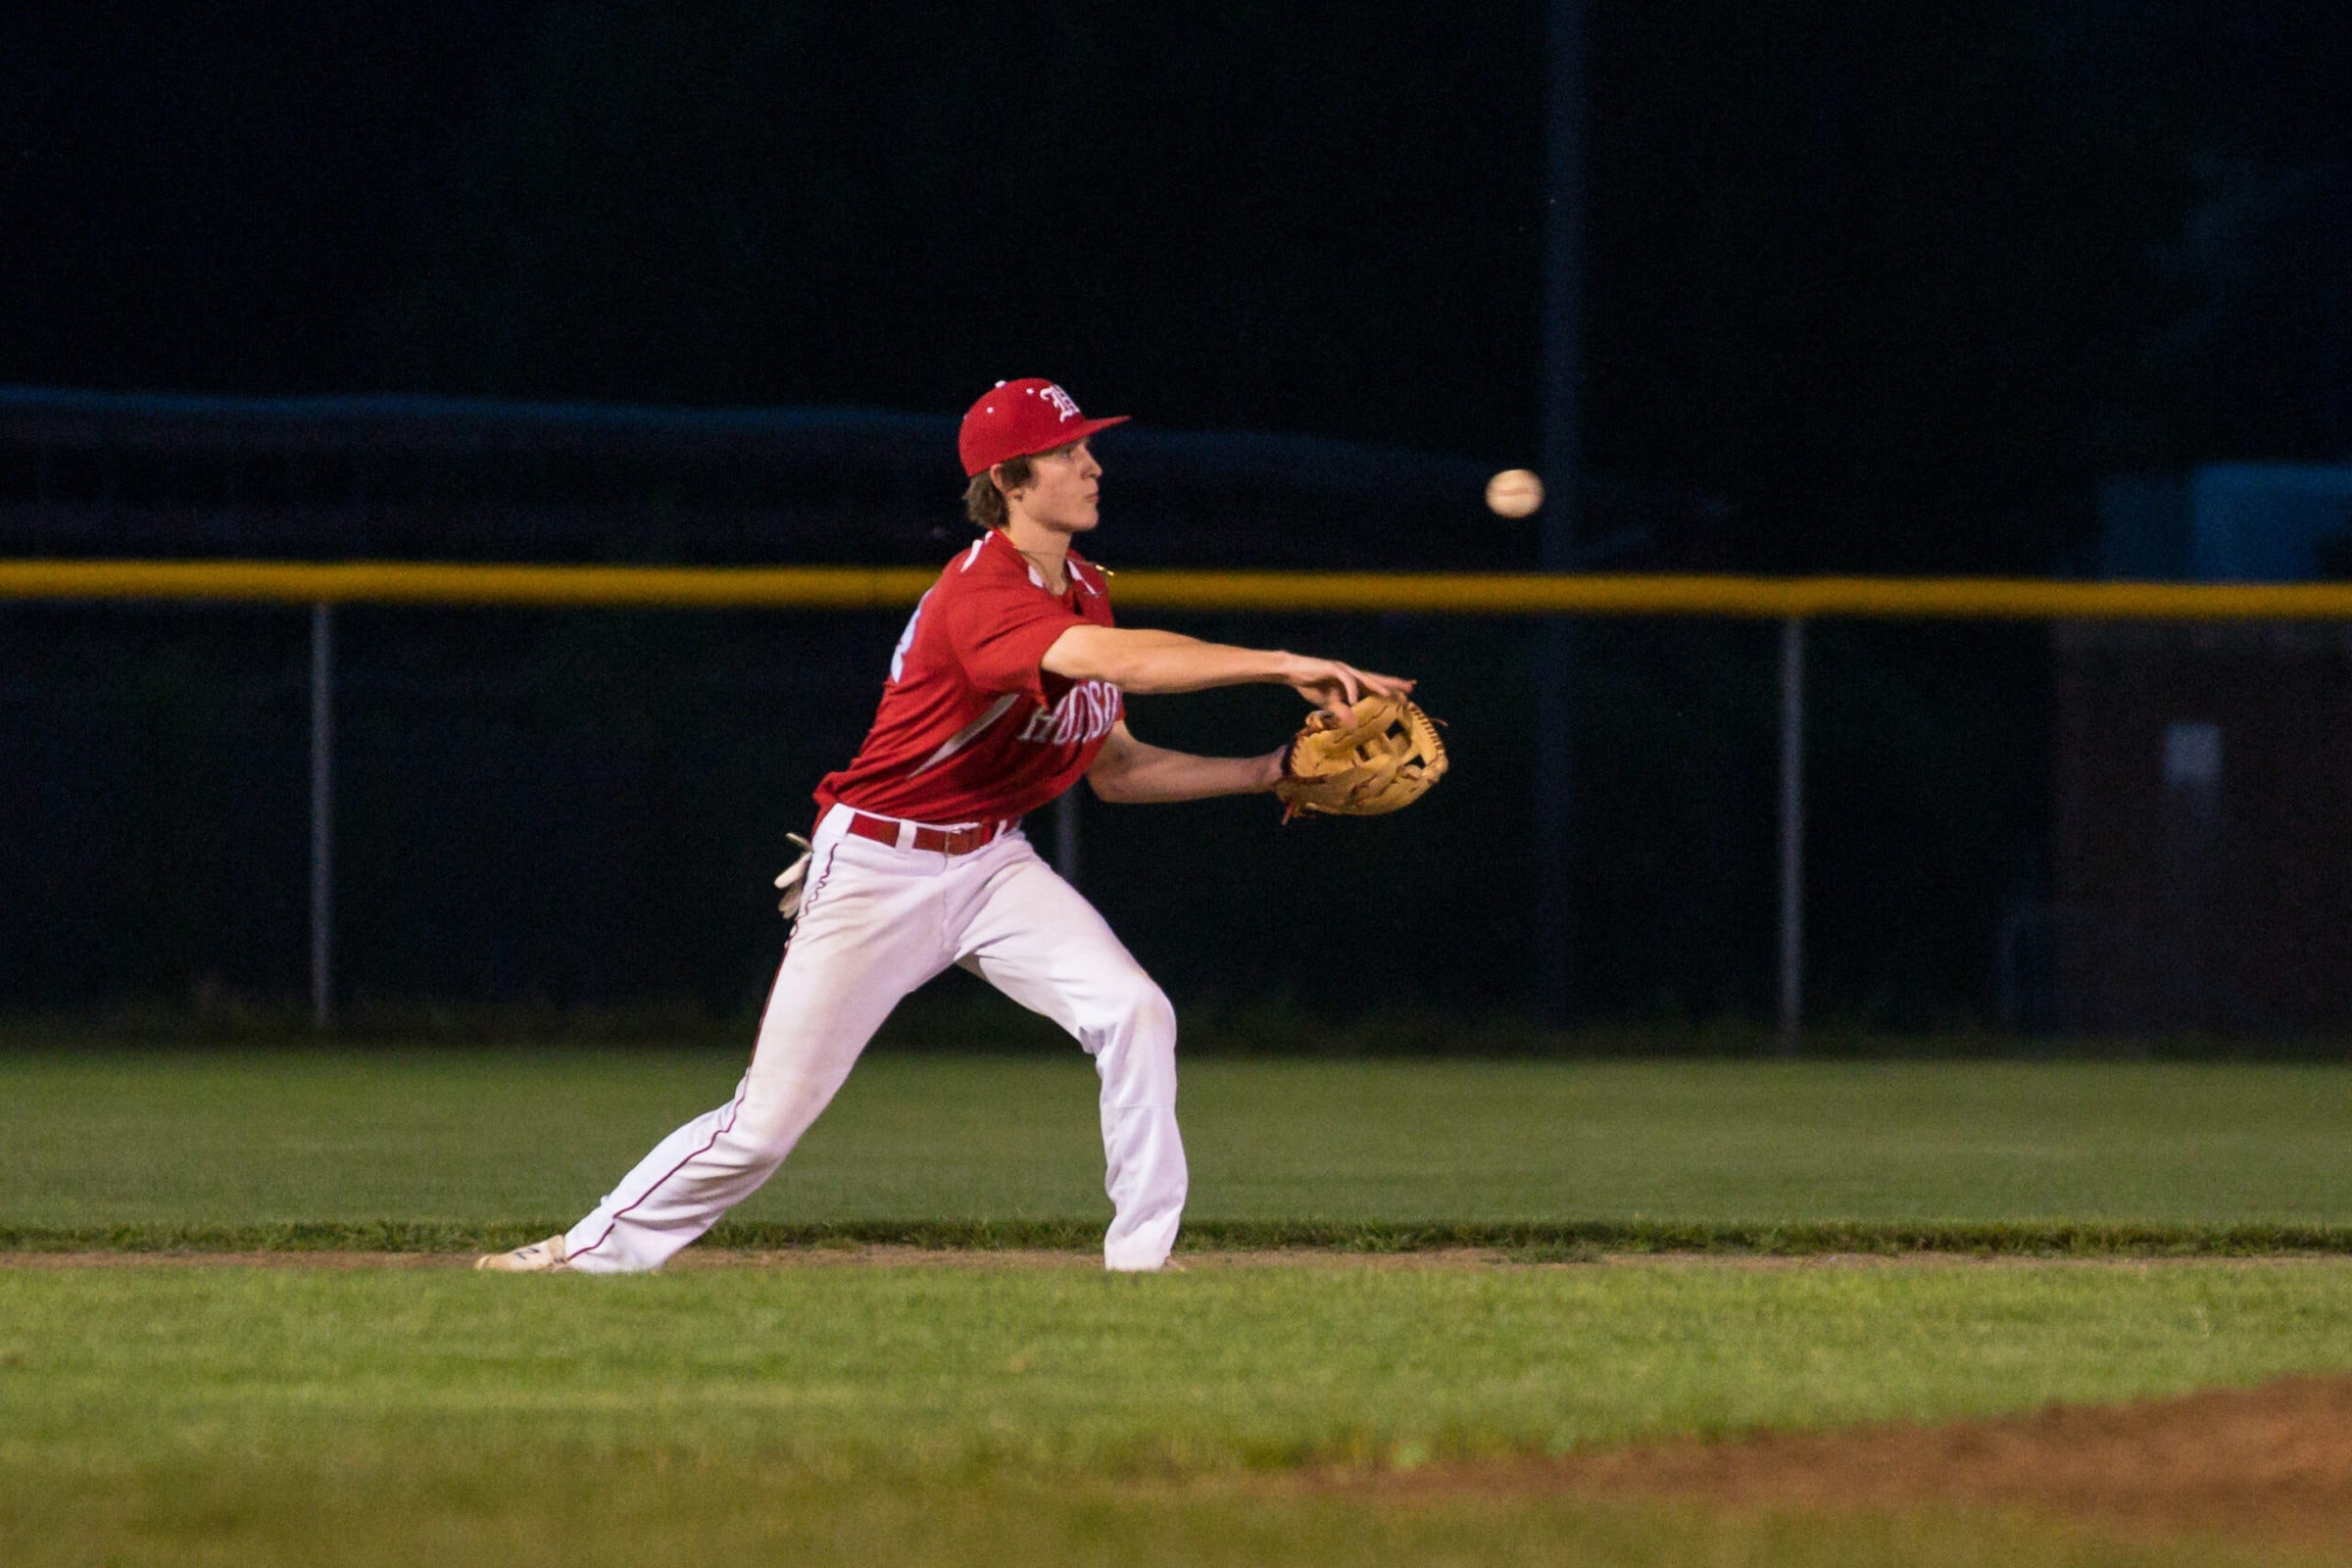 A Hudson infielder throws to a teammate late in their game against Natick.